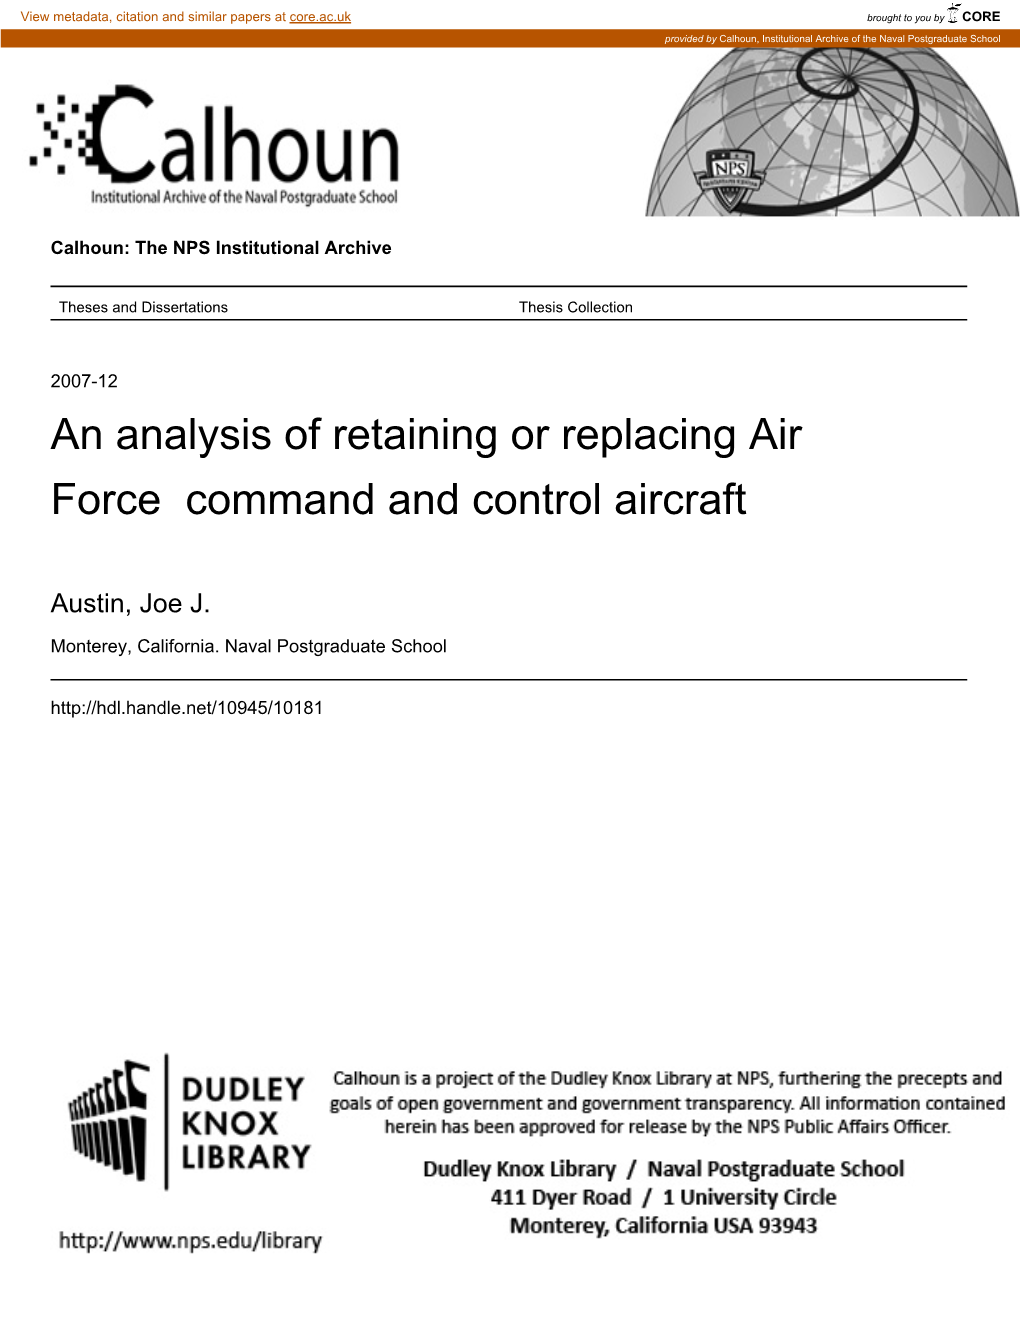 An Analysis of Retaining Or Replacing Air Force Command and Control Aircraft